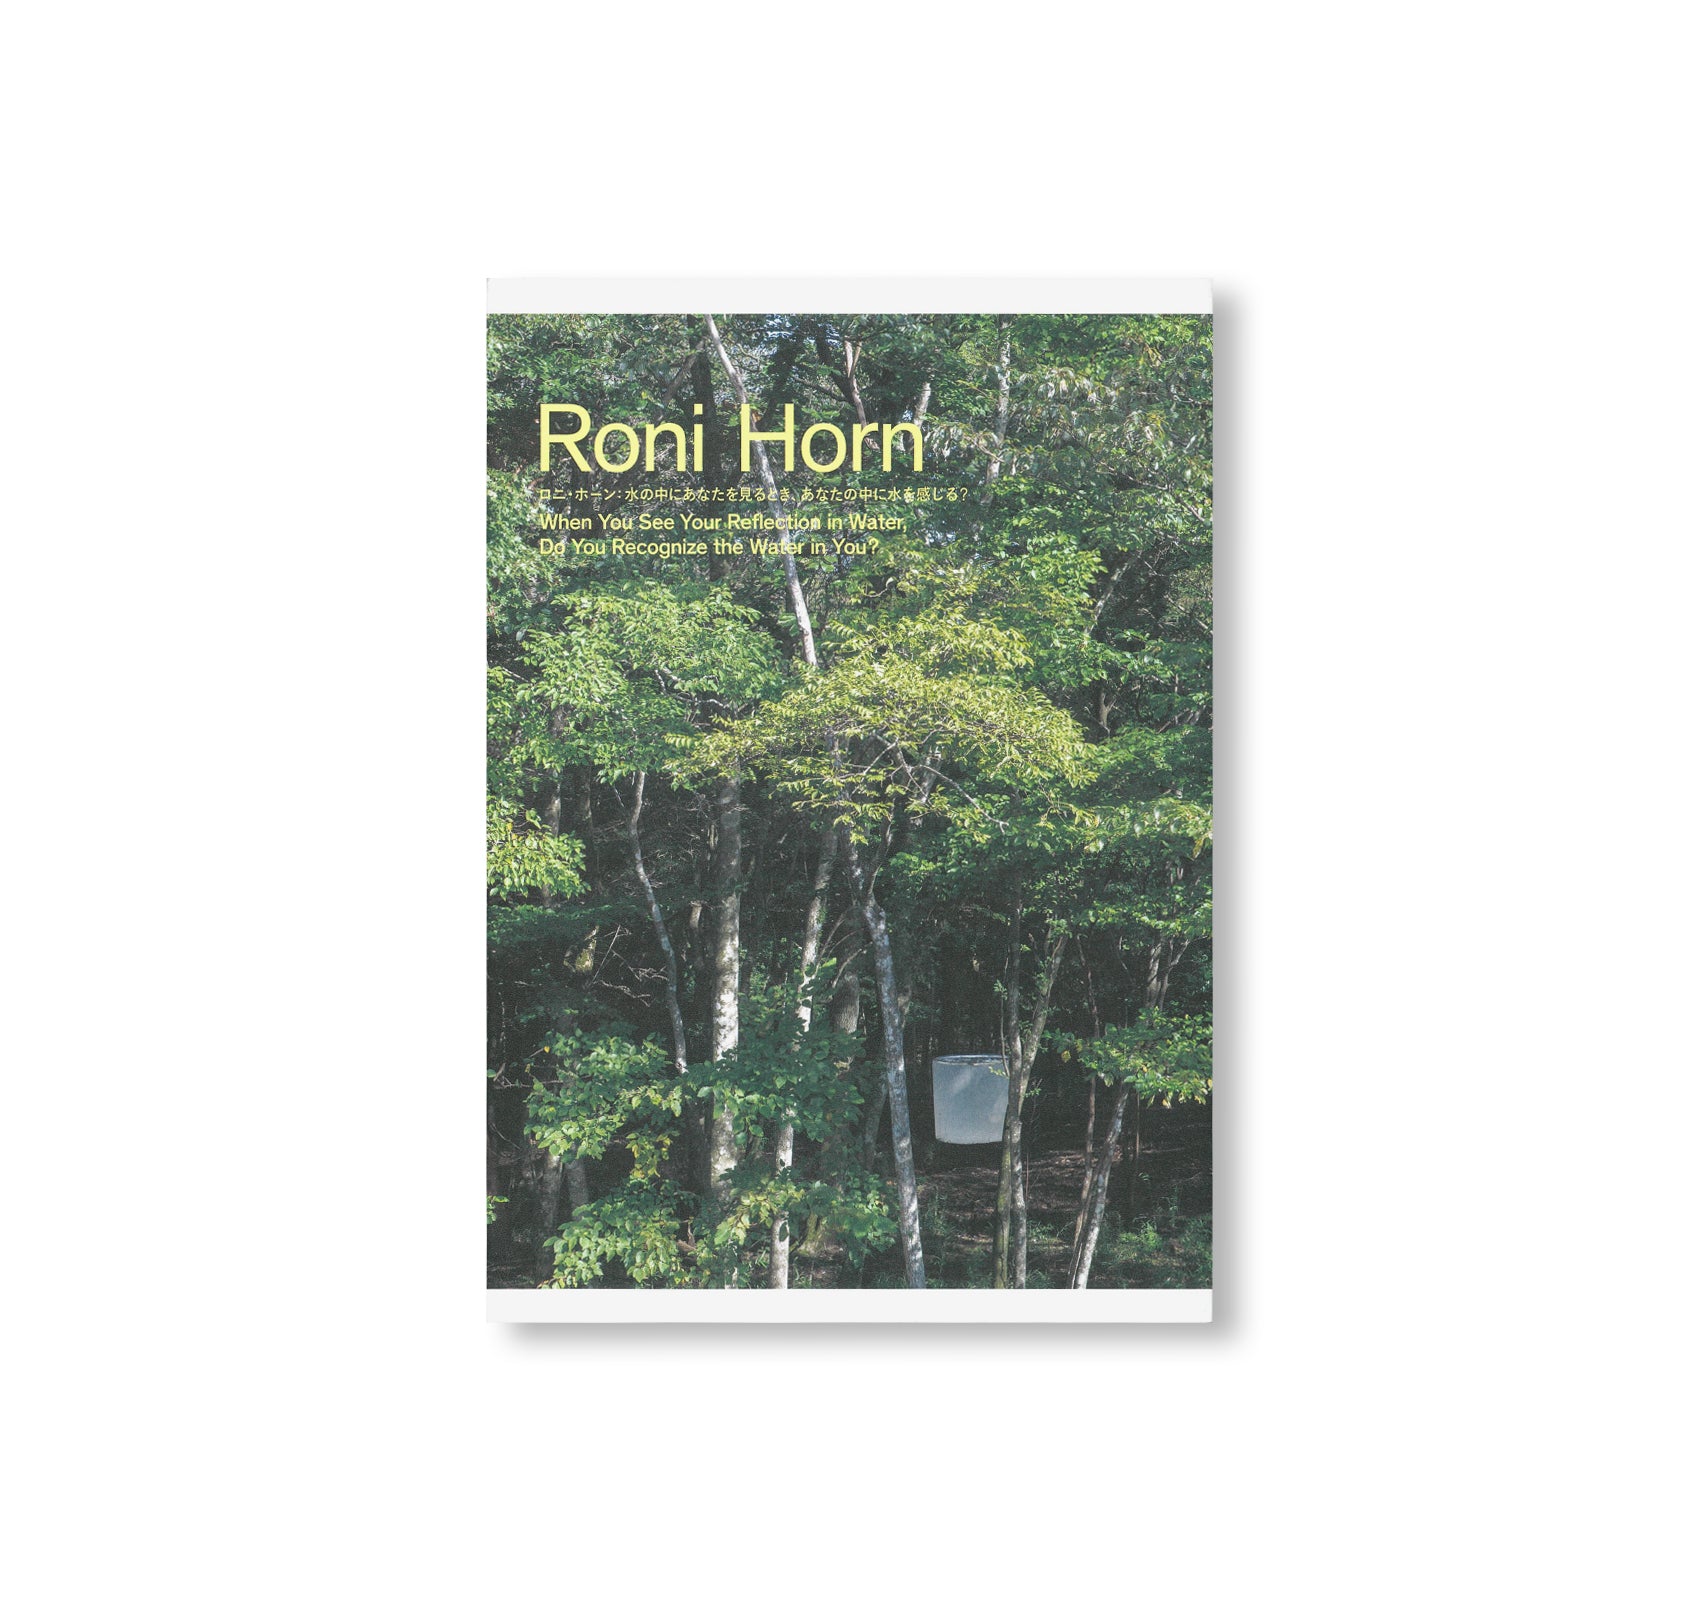 RECOGNIZE　REFLECTION　THE　WHEN　YOU　WATER,　IN　YOU　twelvebooks　SEE　HORN:　DO　–　RONI　YOUR